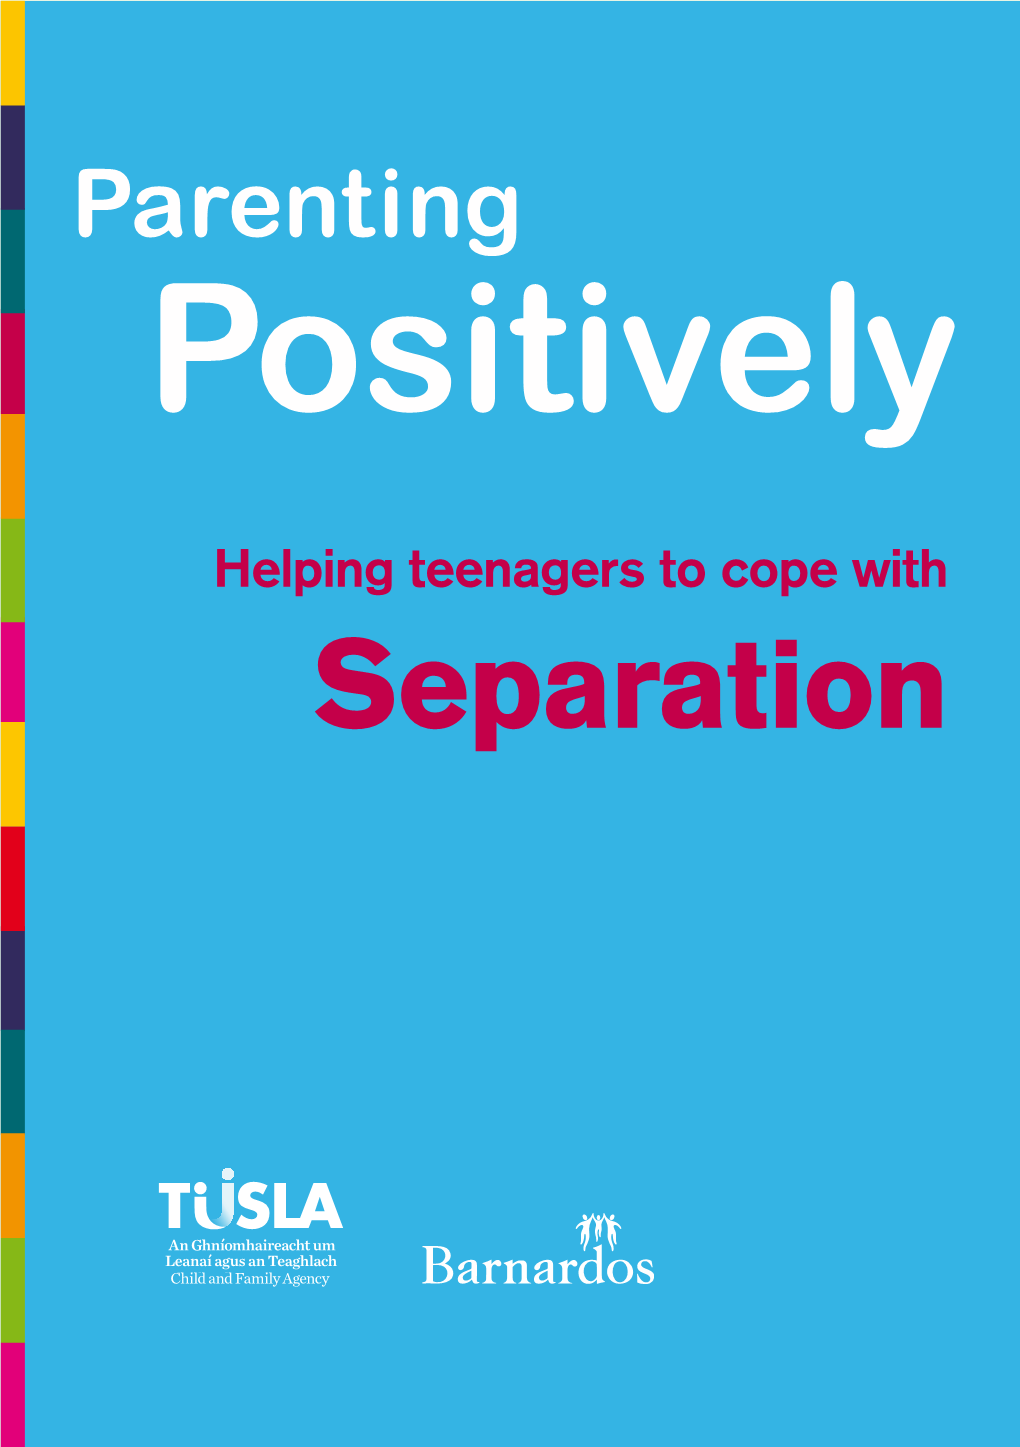 Parenting Positively for Parents of Teenagers: Separation